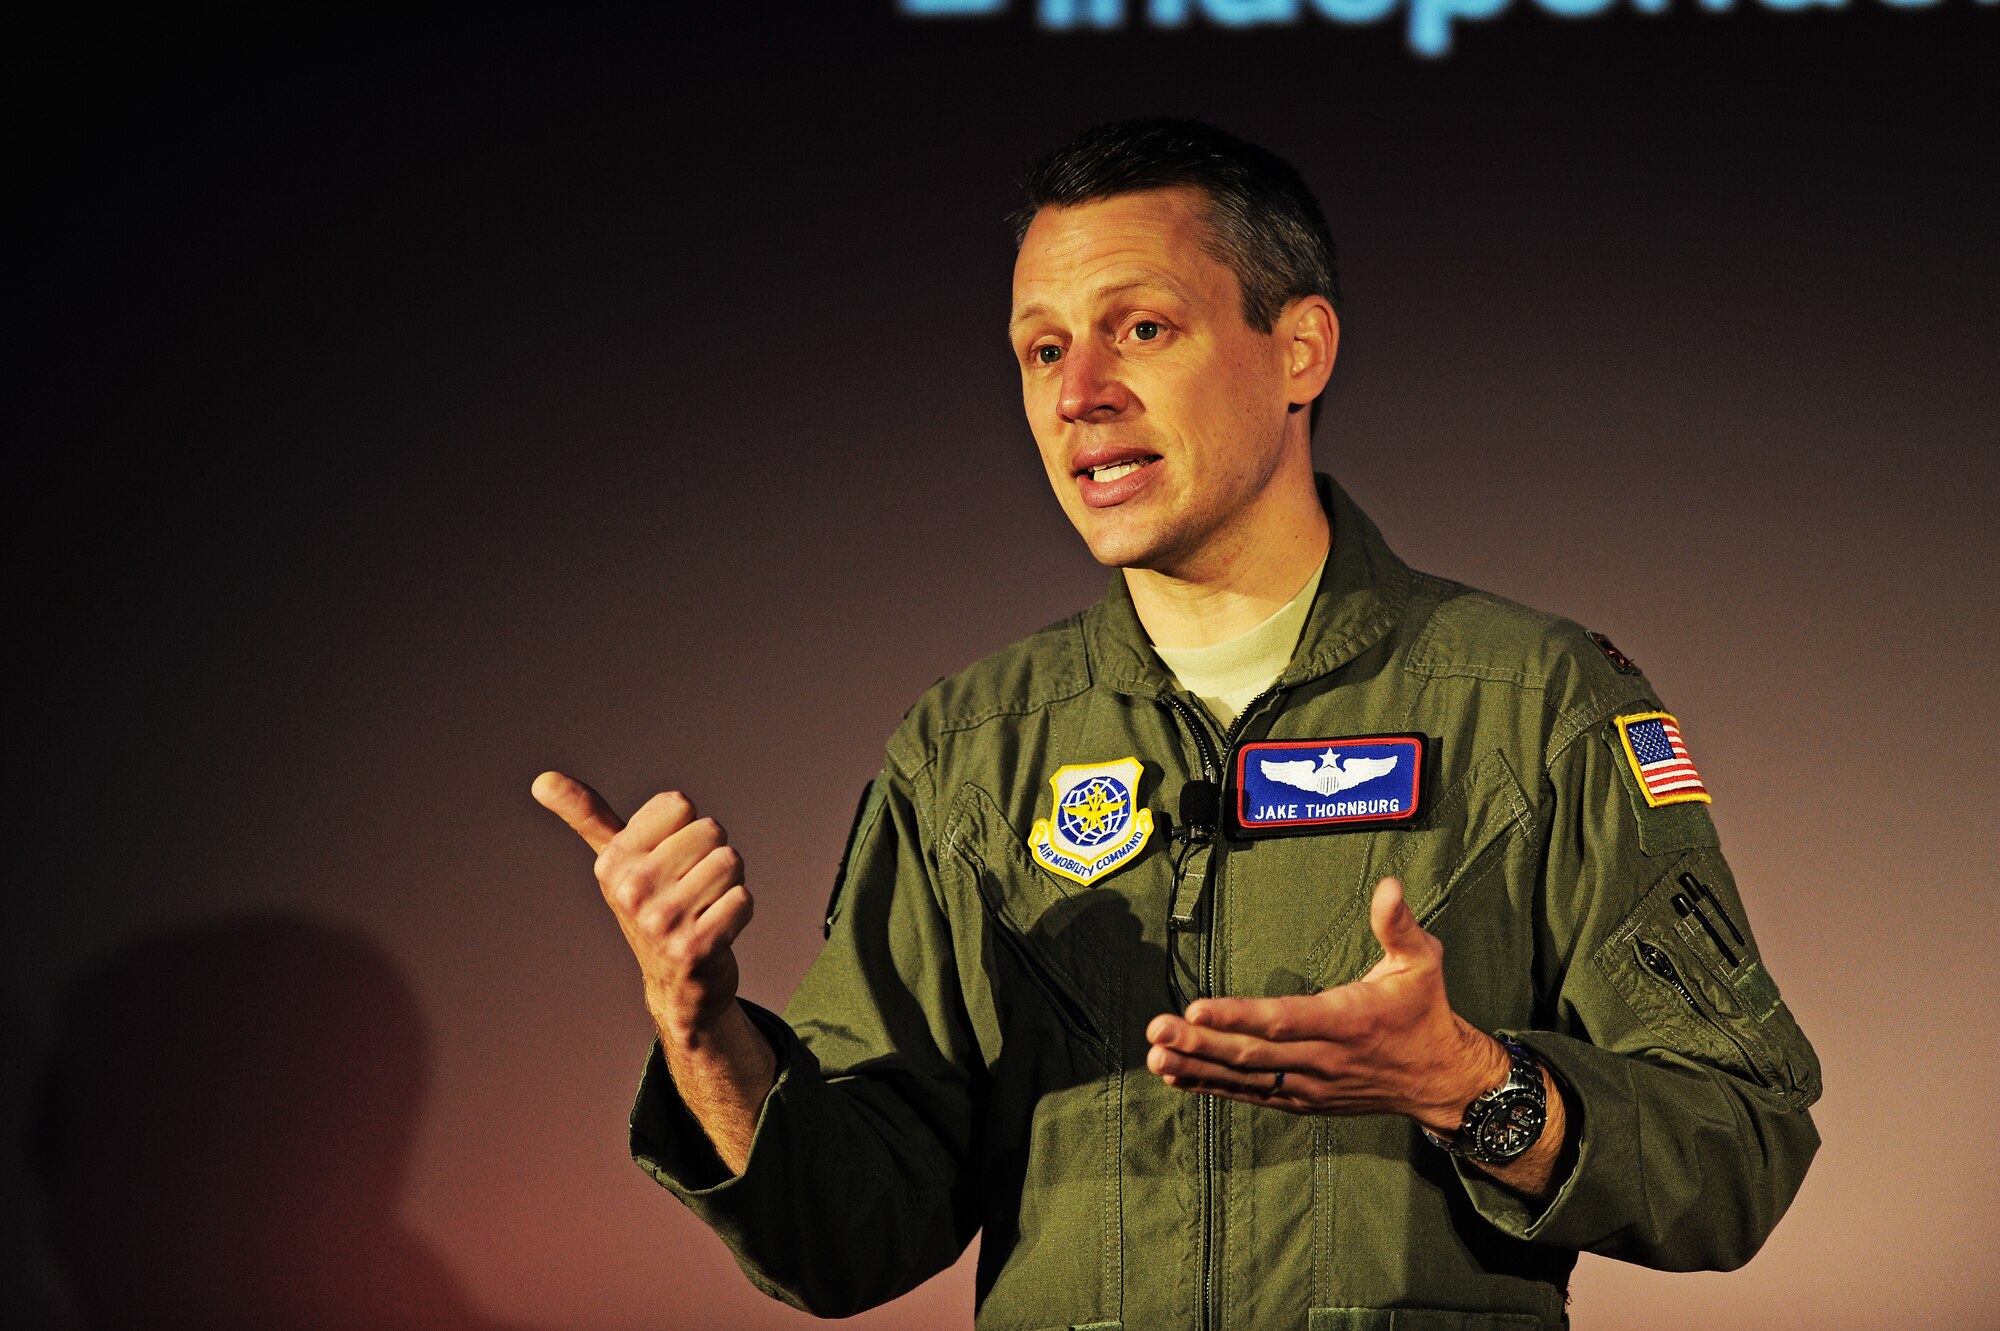 Maj. Jake Thornburg, 62nd Airlift Wing instructor pilot, speaks to the audience during a TEDx talk at Scott Air Force Base, Ill. May 30 about his experience with an honorable return mission where he transported the remains of 19 flag-draped caskets of men who died while serving in Afghanistan.  He maintains expertise in mission preparation, aircraft systems, in-flight refueling, low-altitude and austere airfield operations in the C-17A. (U.S. Air Force photo/ Staff Sgt. Ryan Crane)